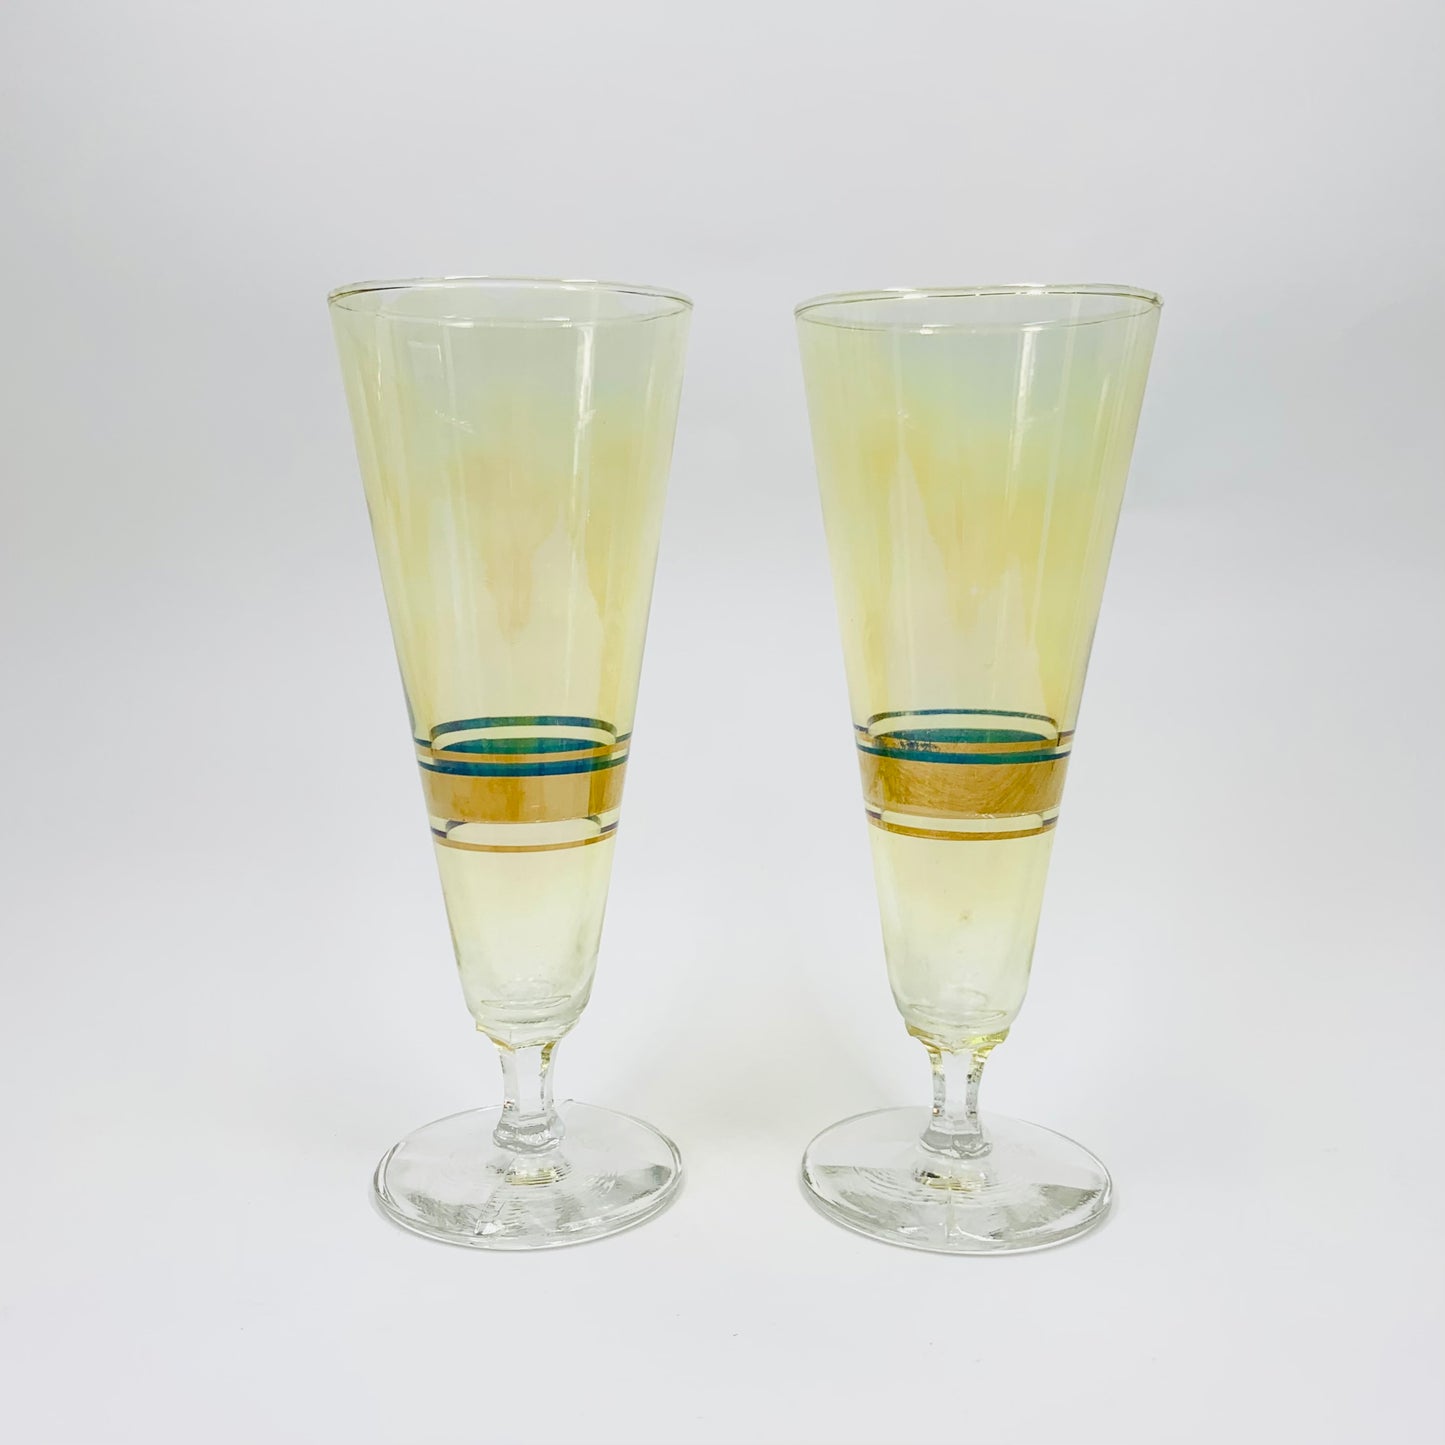 Extremely rare antique flashed iridescent gold glass champagne flutes